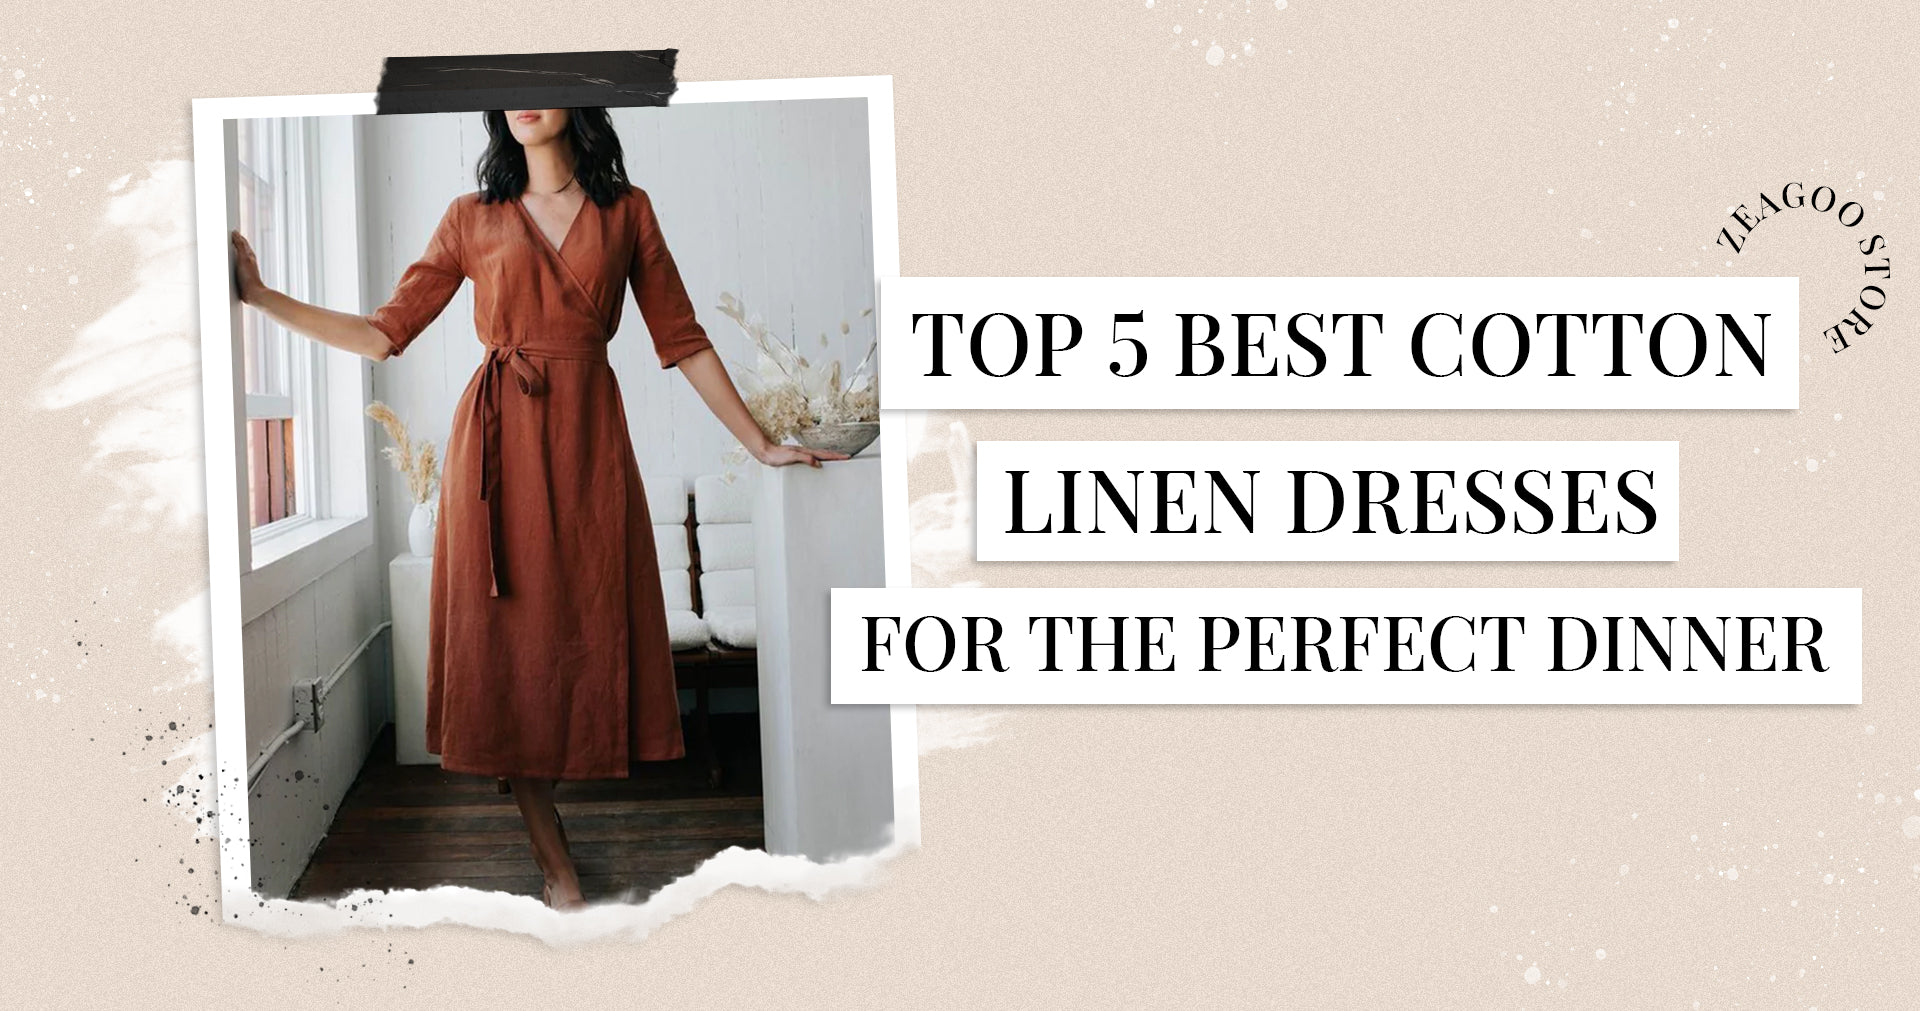 Top 5 Best Cotton Linen Dresses for the Perfect Dinner